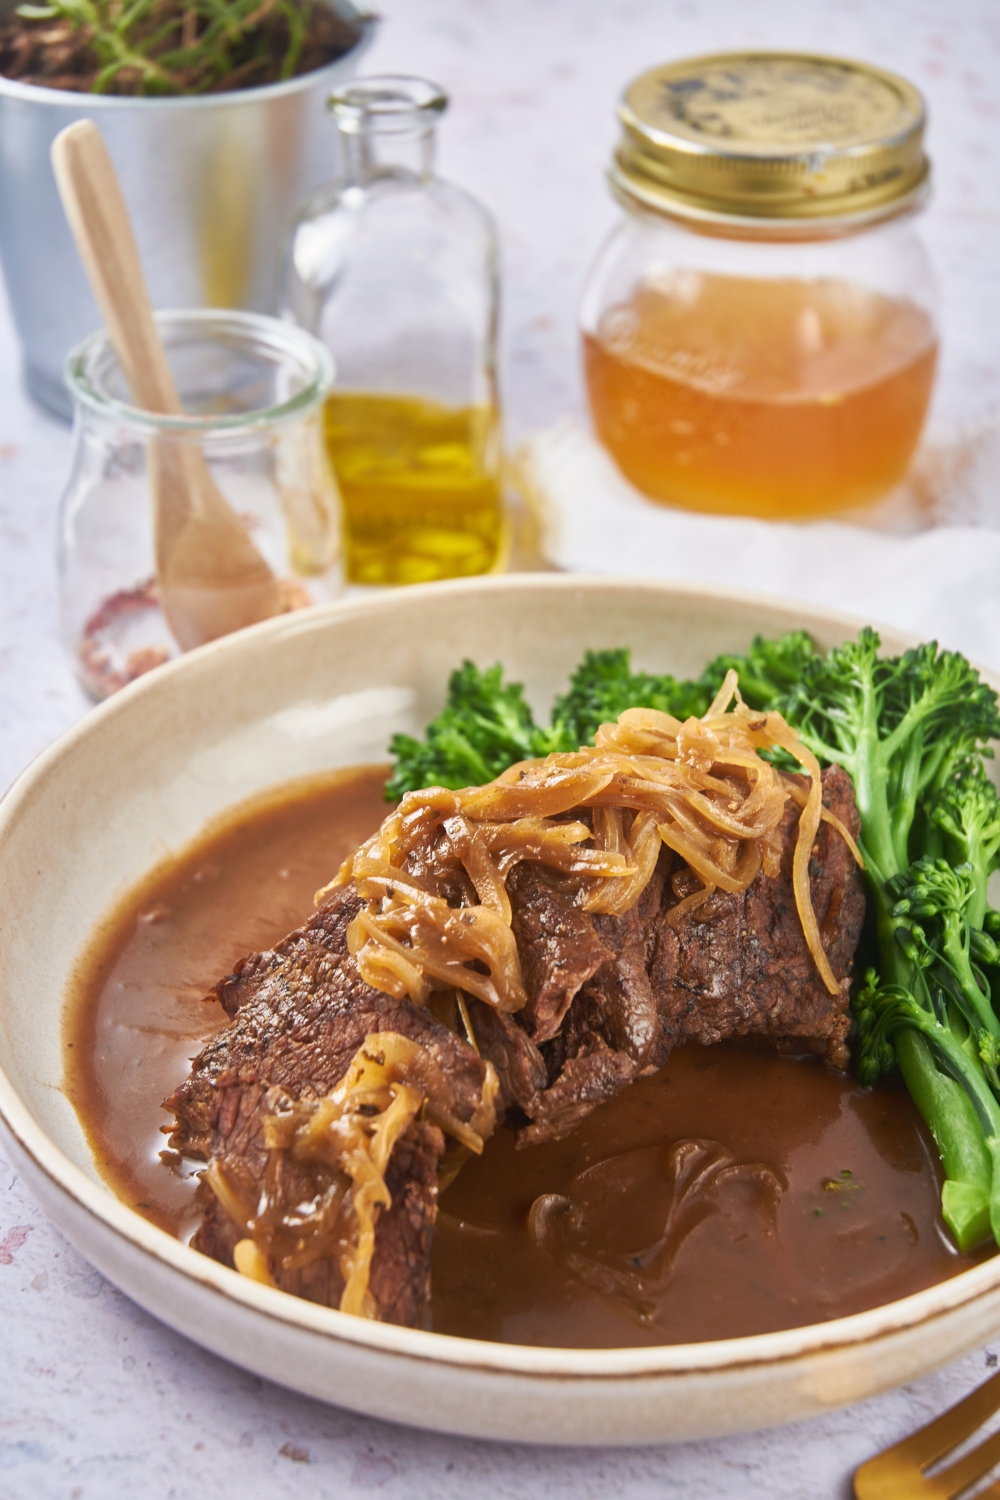 Sirloin roast topped with caramelized onions and covered in a brown gravy, with a side of broccoli.